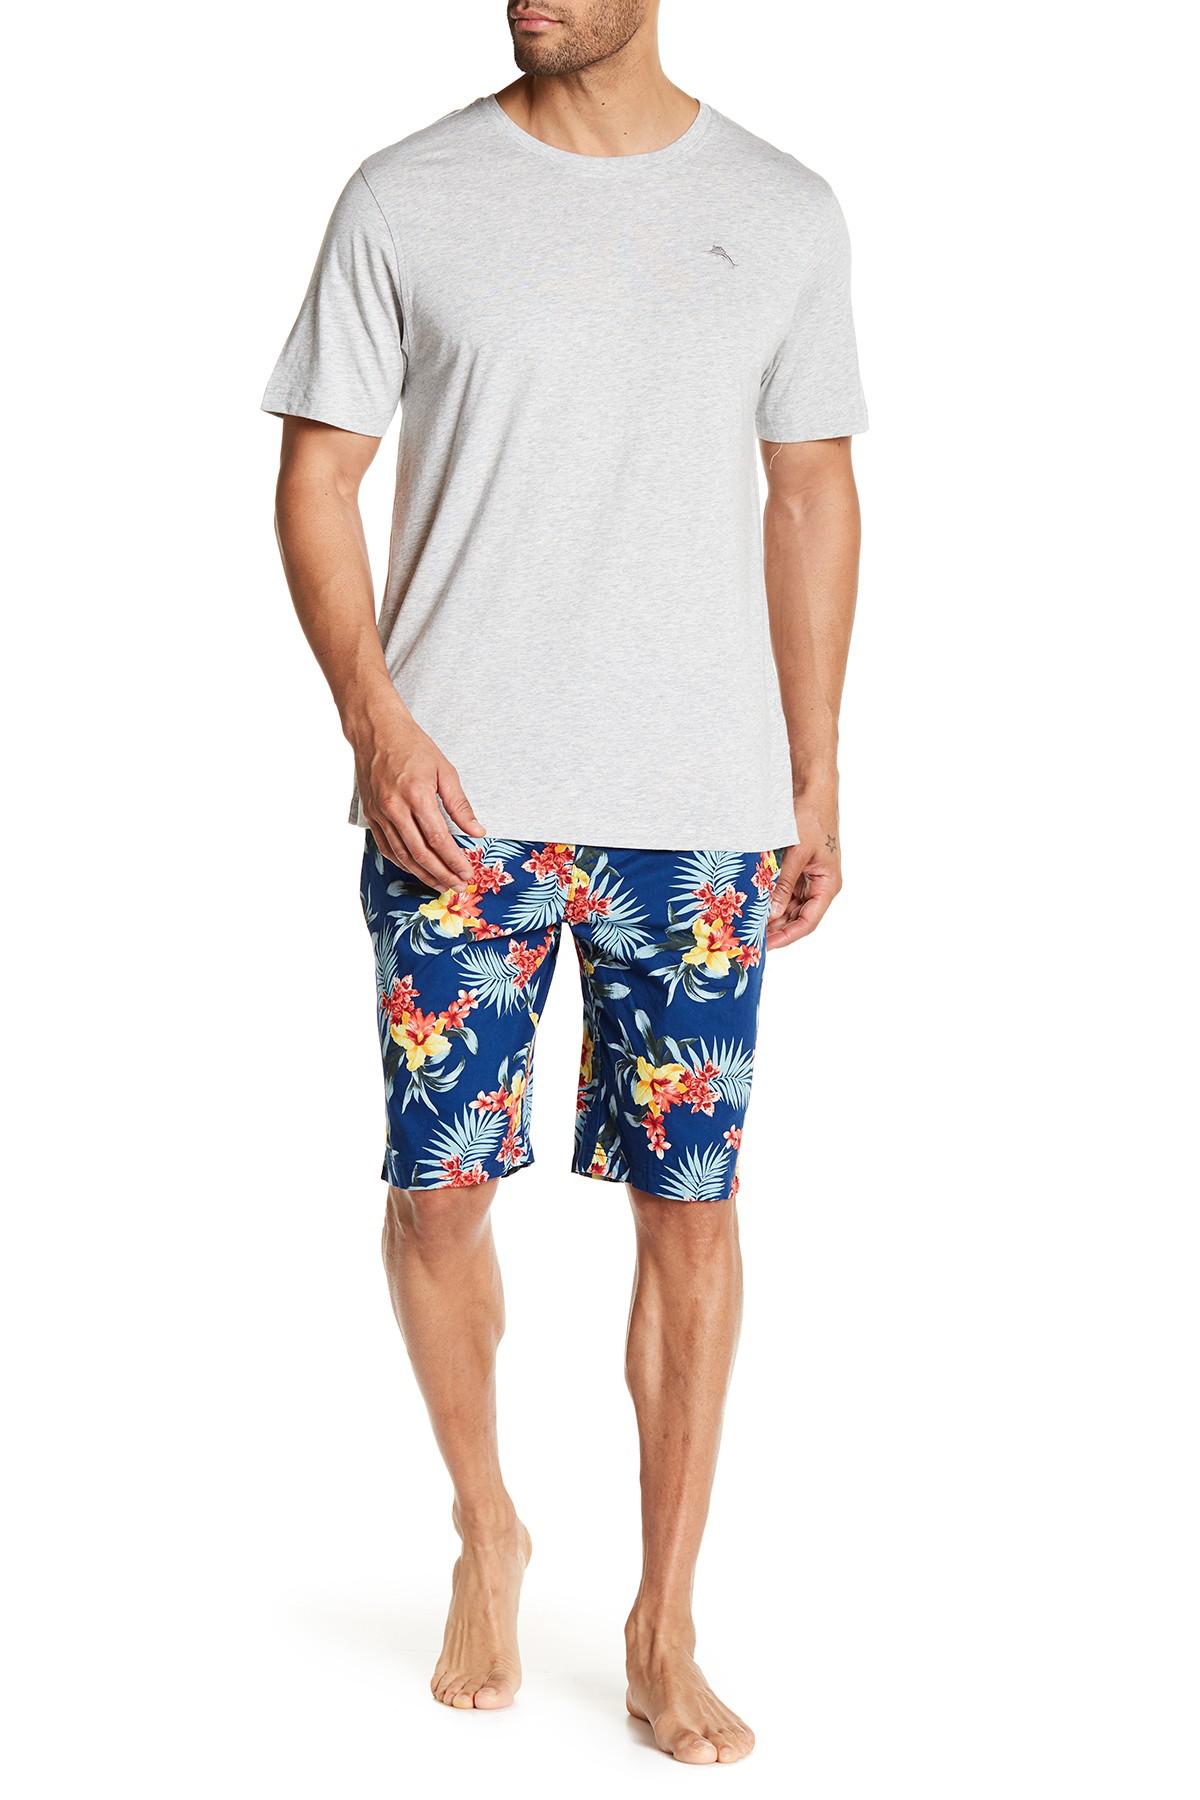 Tommy Bahama Cotton Tropical Floral 2-piece Pj Set in Blue for Men - Lyst